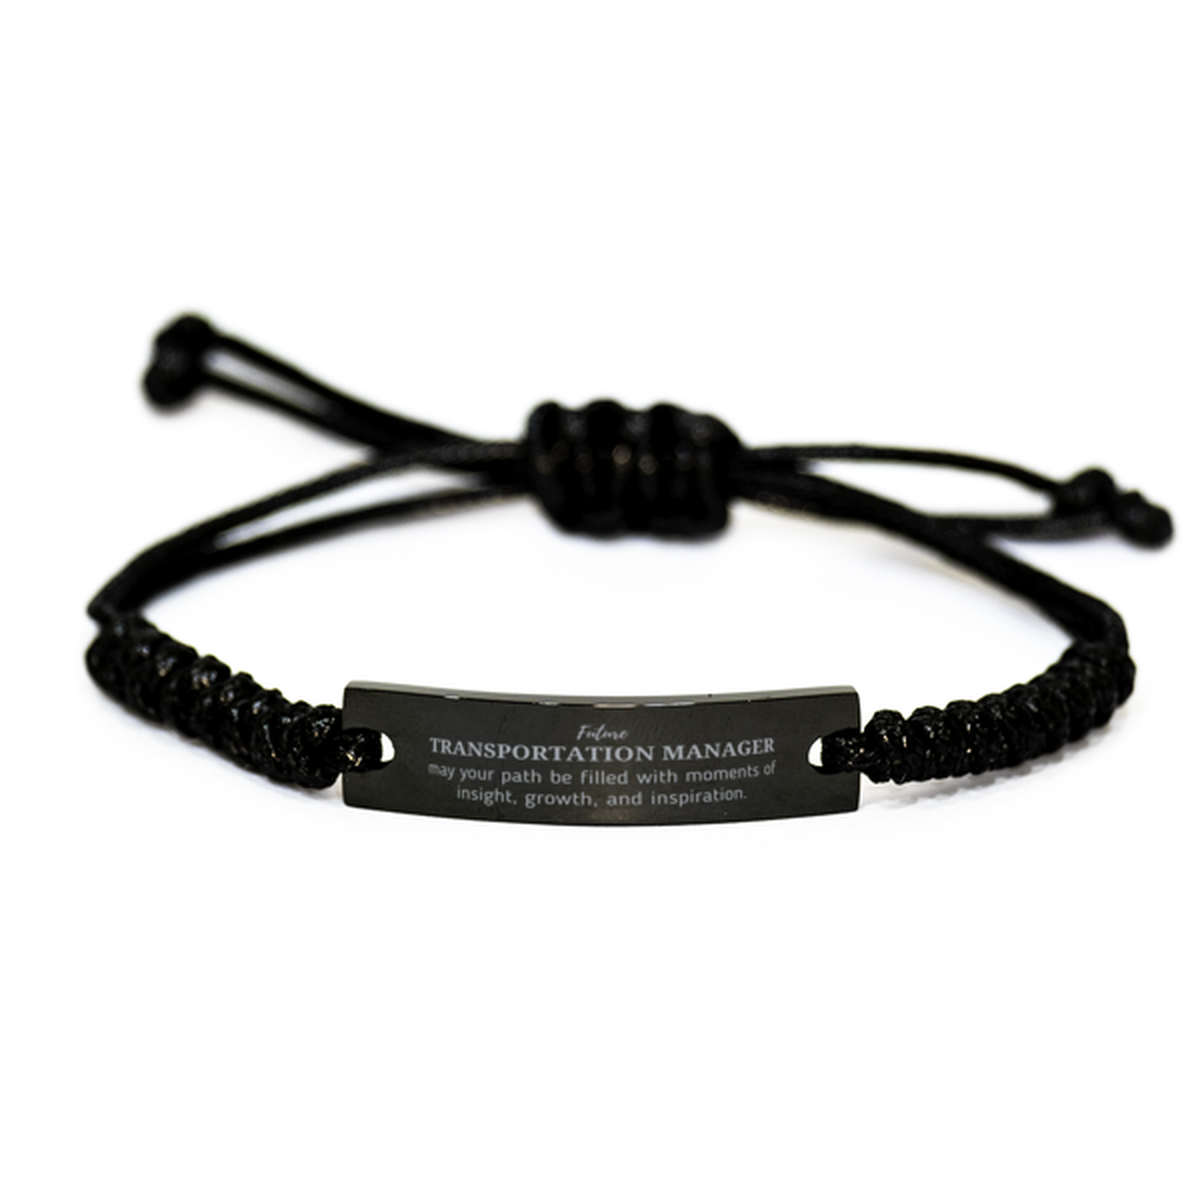 Future Transportation Manager Gifts, May your path be filled with moments of insight, Graduation Gifts for New Transportation Manager, Christmas Unique Black Rope Bracelet For Men, Women, Friends